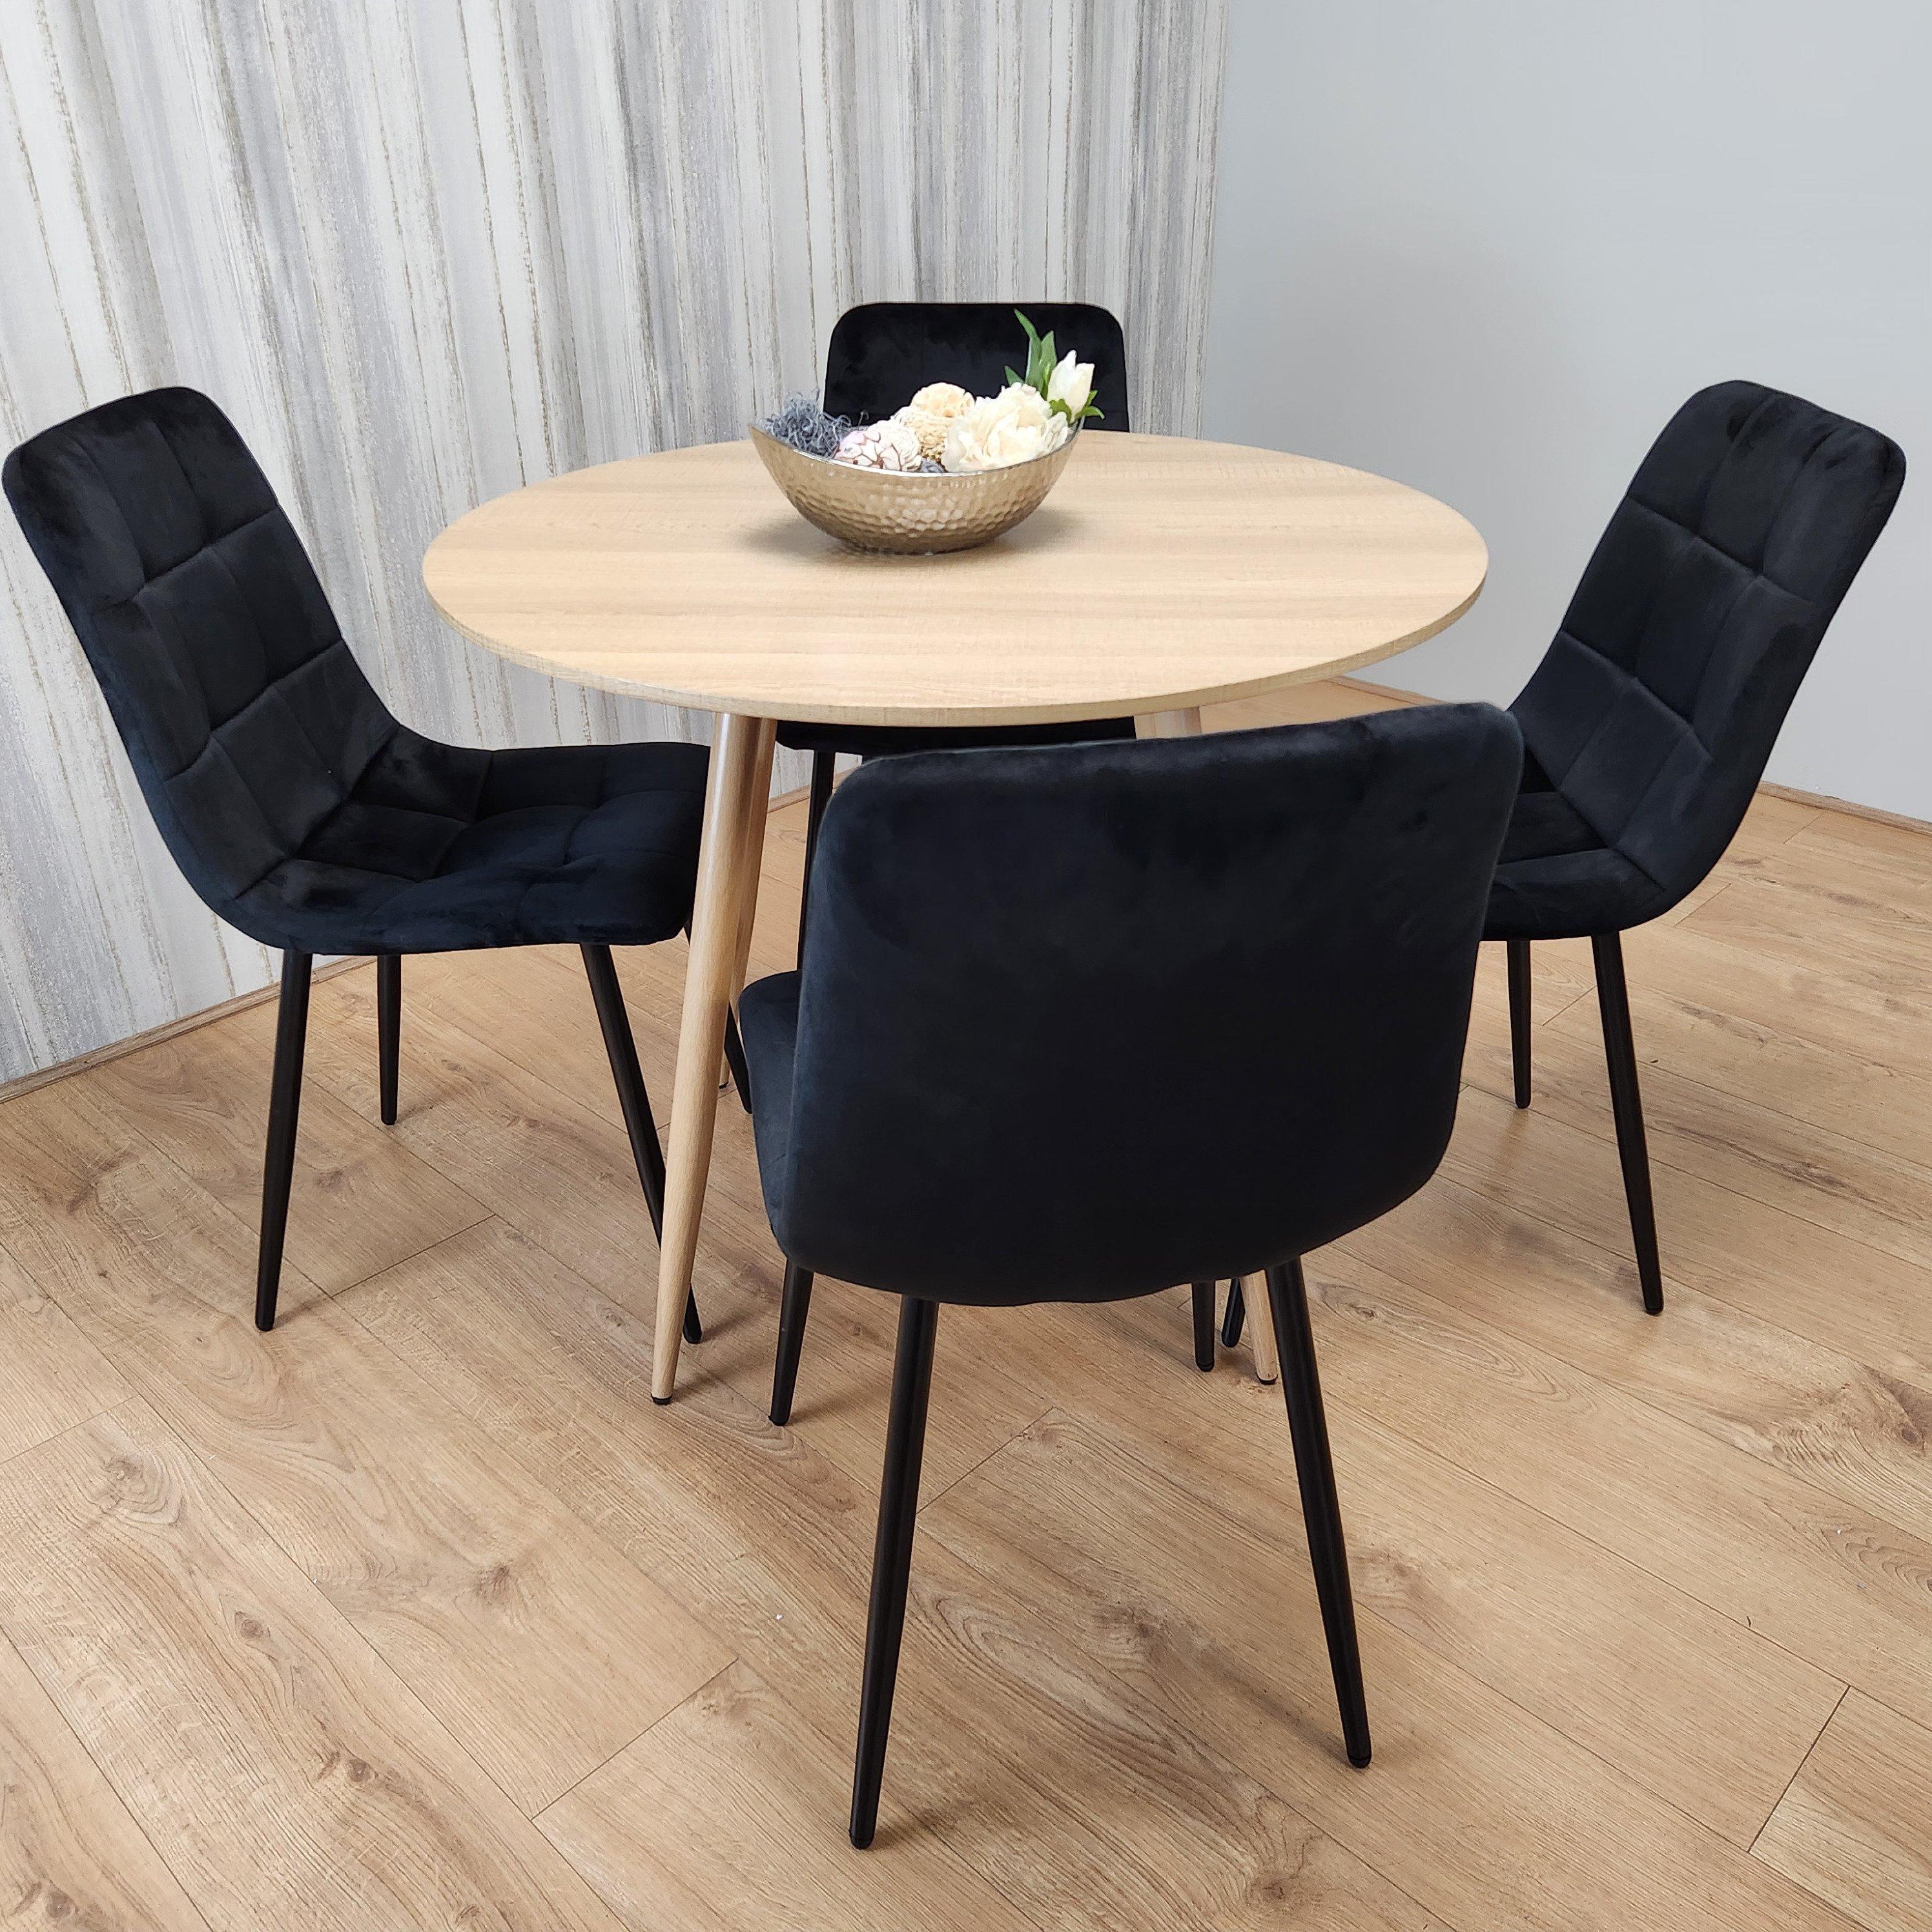 Round Oak Effect Kitchen Dining Table With 4 Black Velvet Tufted Chairs Dining Set